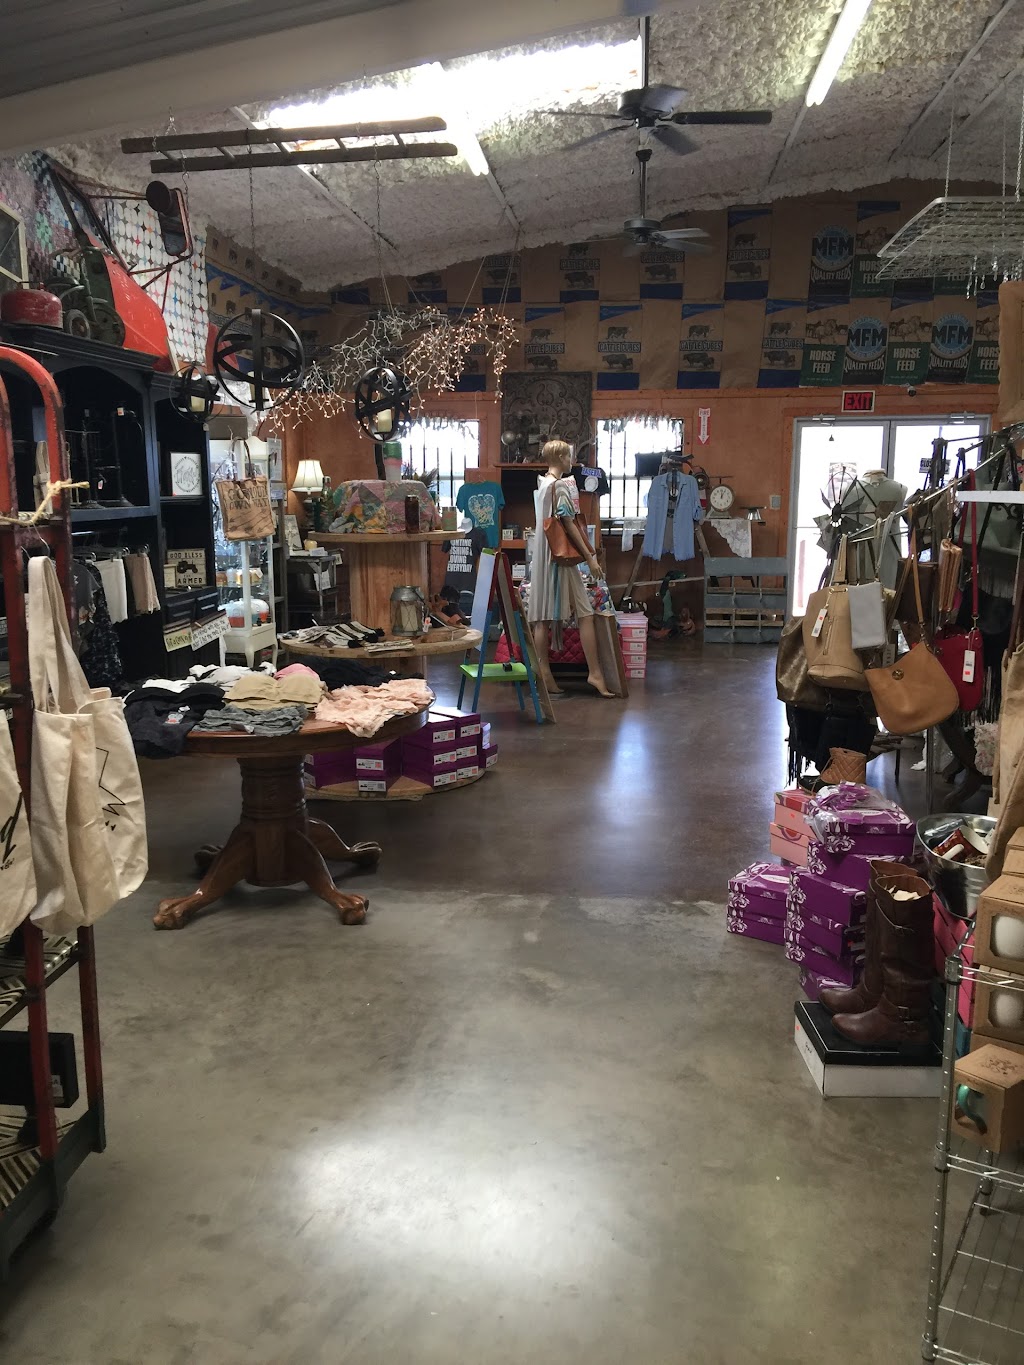 Mabank Feed Inc Southern Glitz Boutique | 1100 N 3rd St, Mabank, TX 75147, USA | Phone: (903) 887-1771